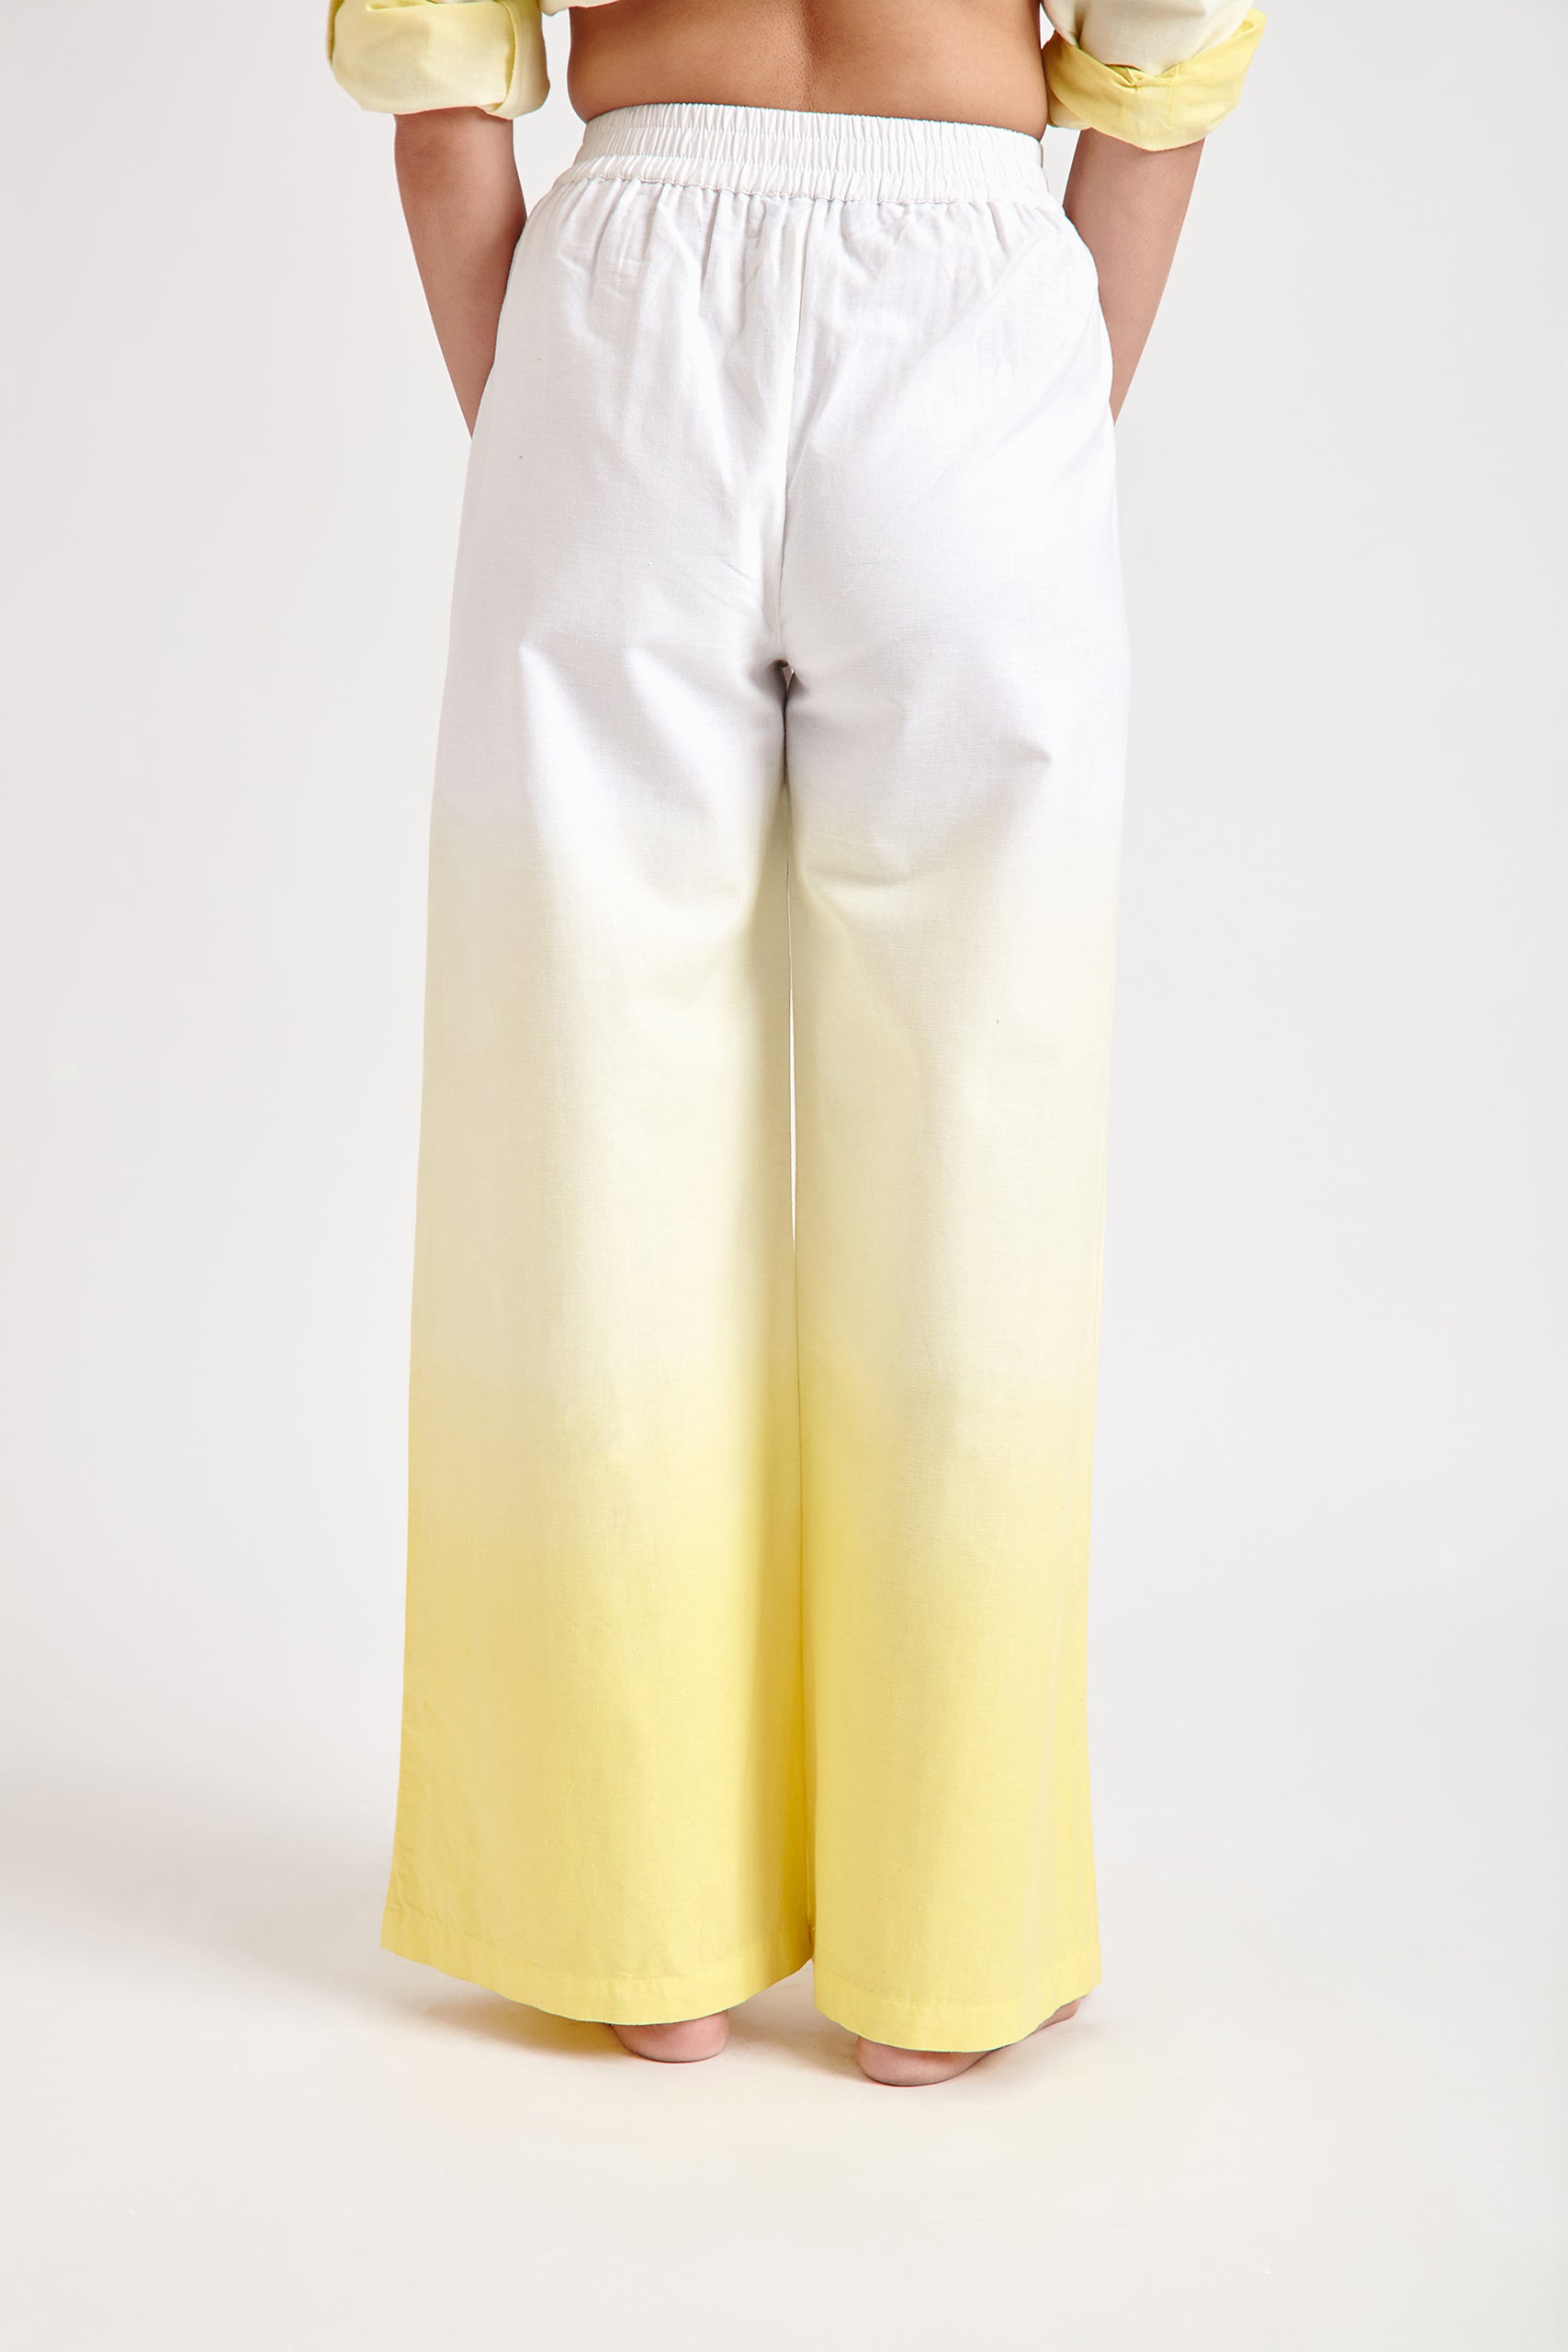 Ombre Trouser